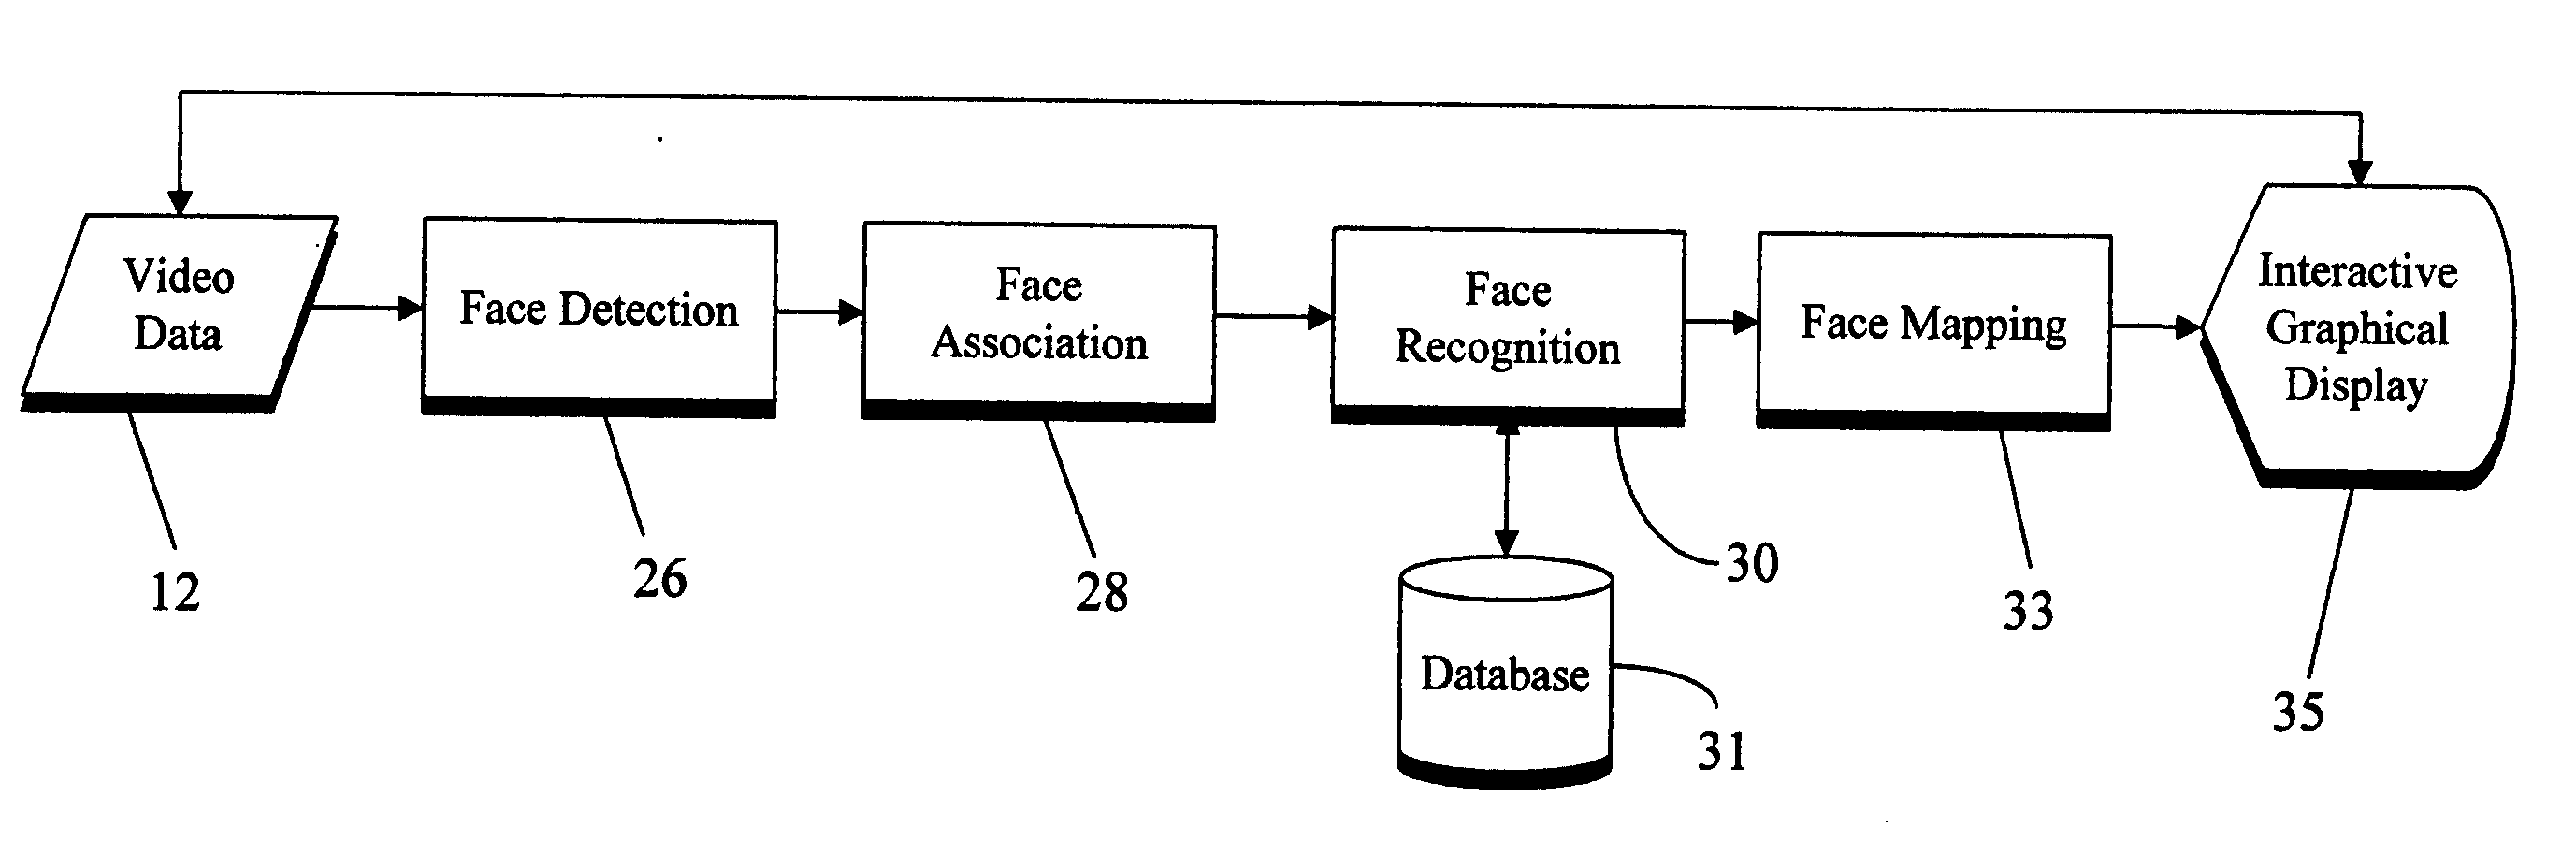 Video retrieval system for human face content